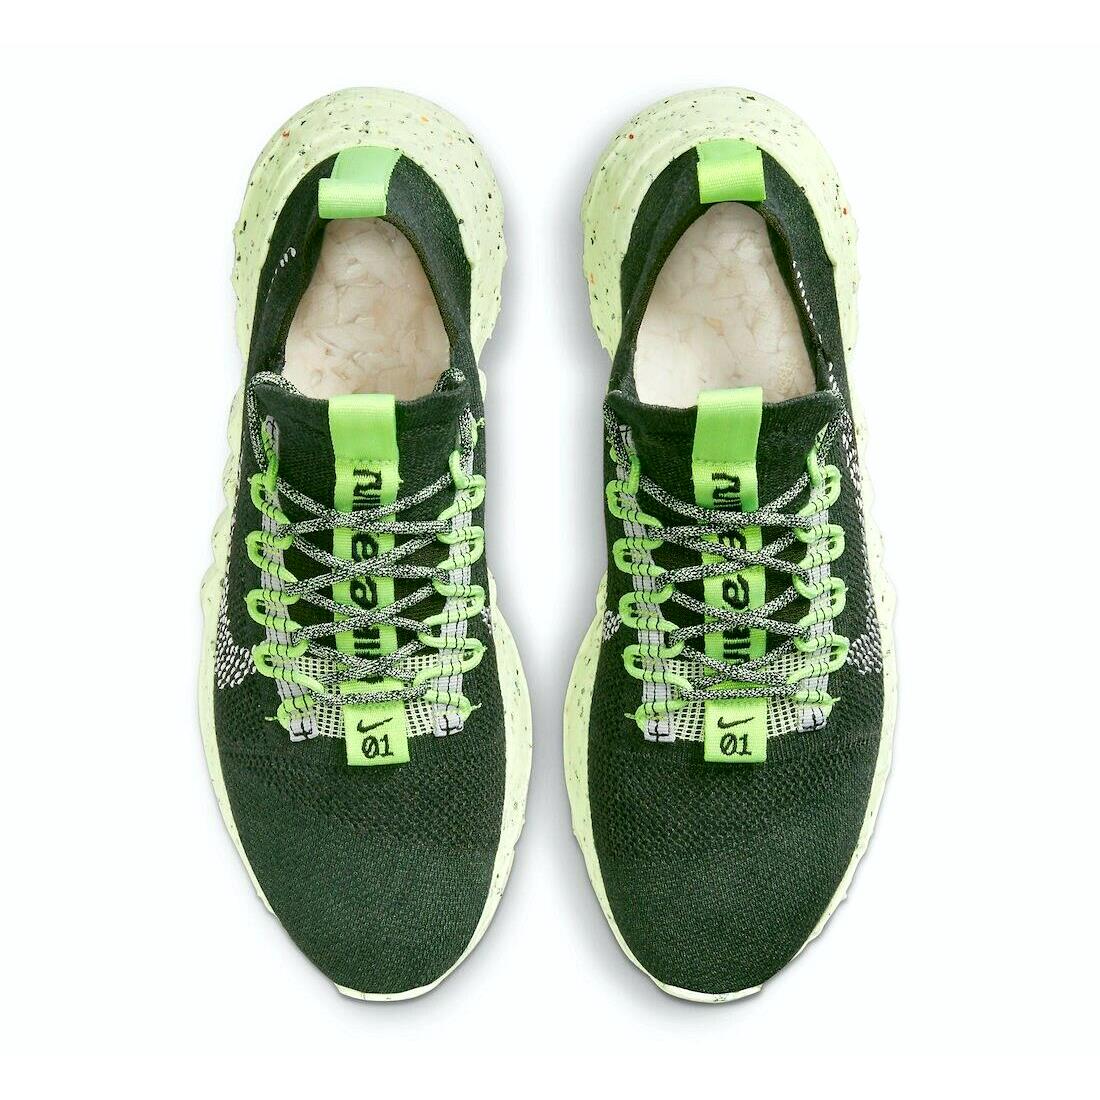 Nike shoes Space Hippie - CARBON GREEN WHITE 0